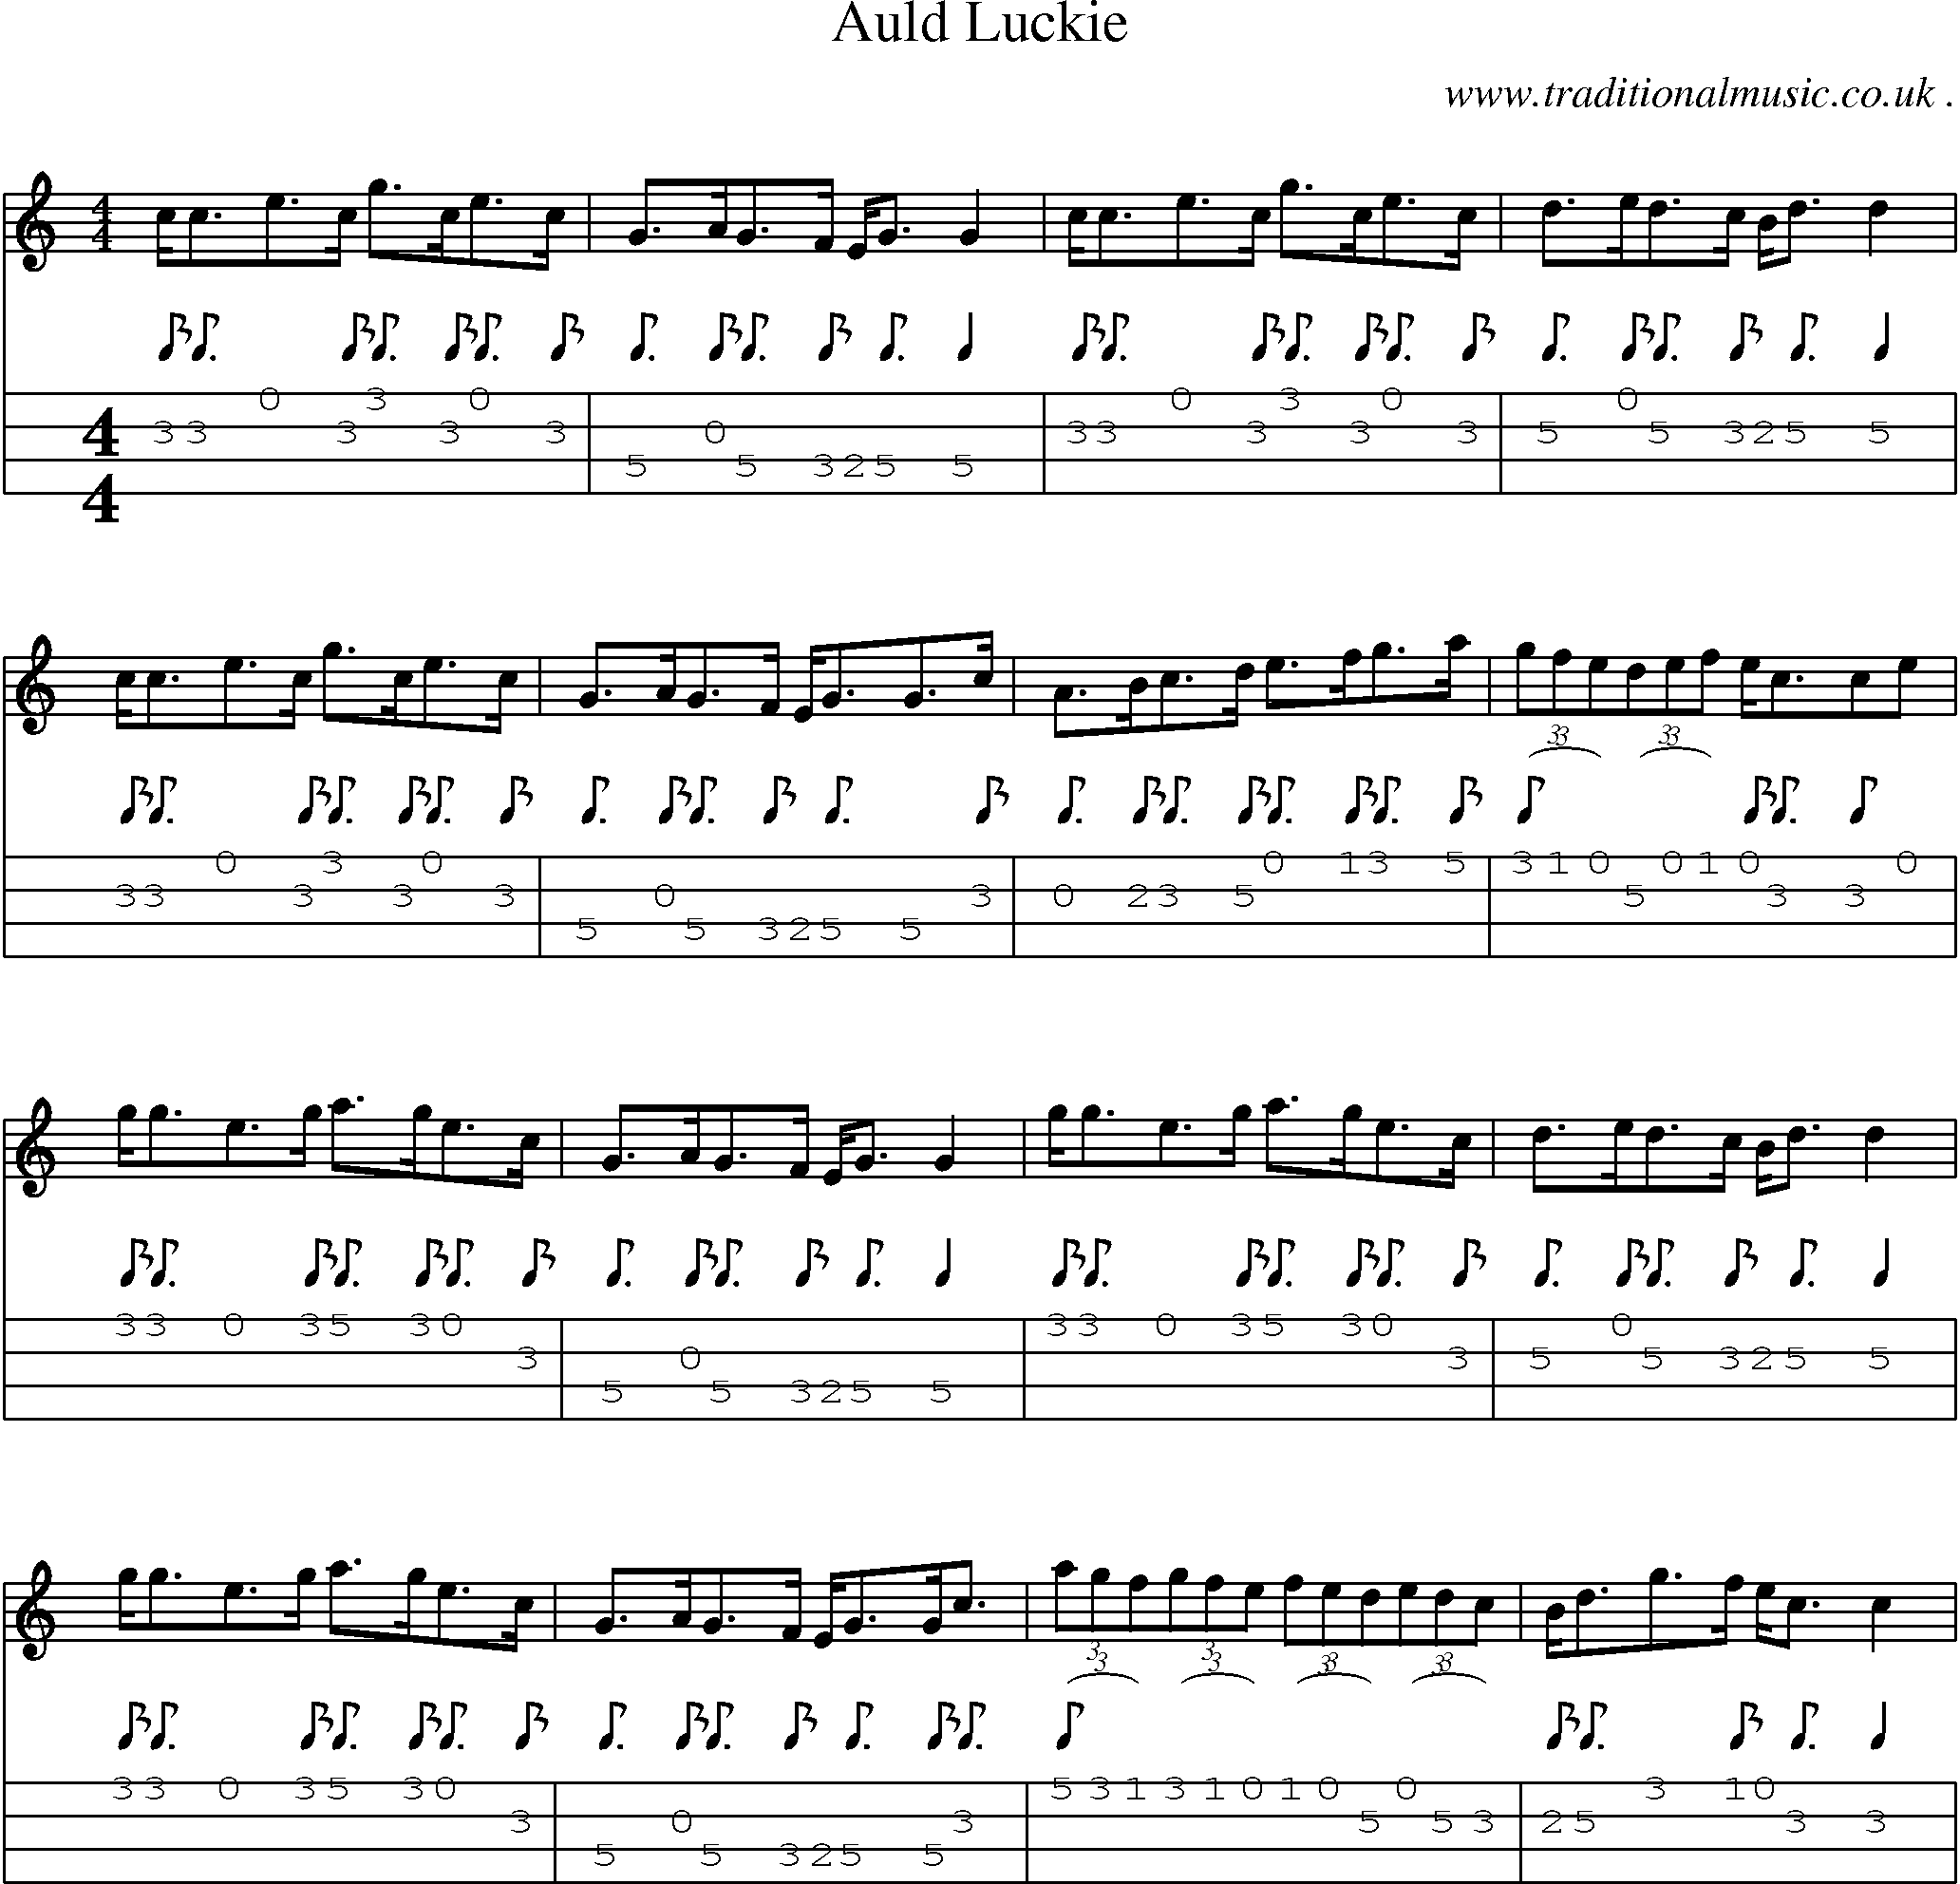 Sheet-music  score, Chords and Mandolin Tabs for Auld Luckie